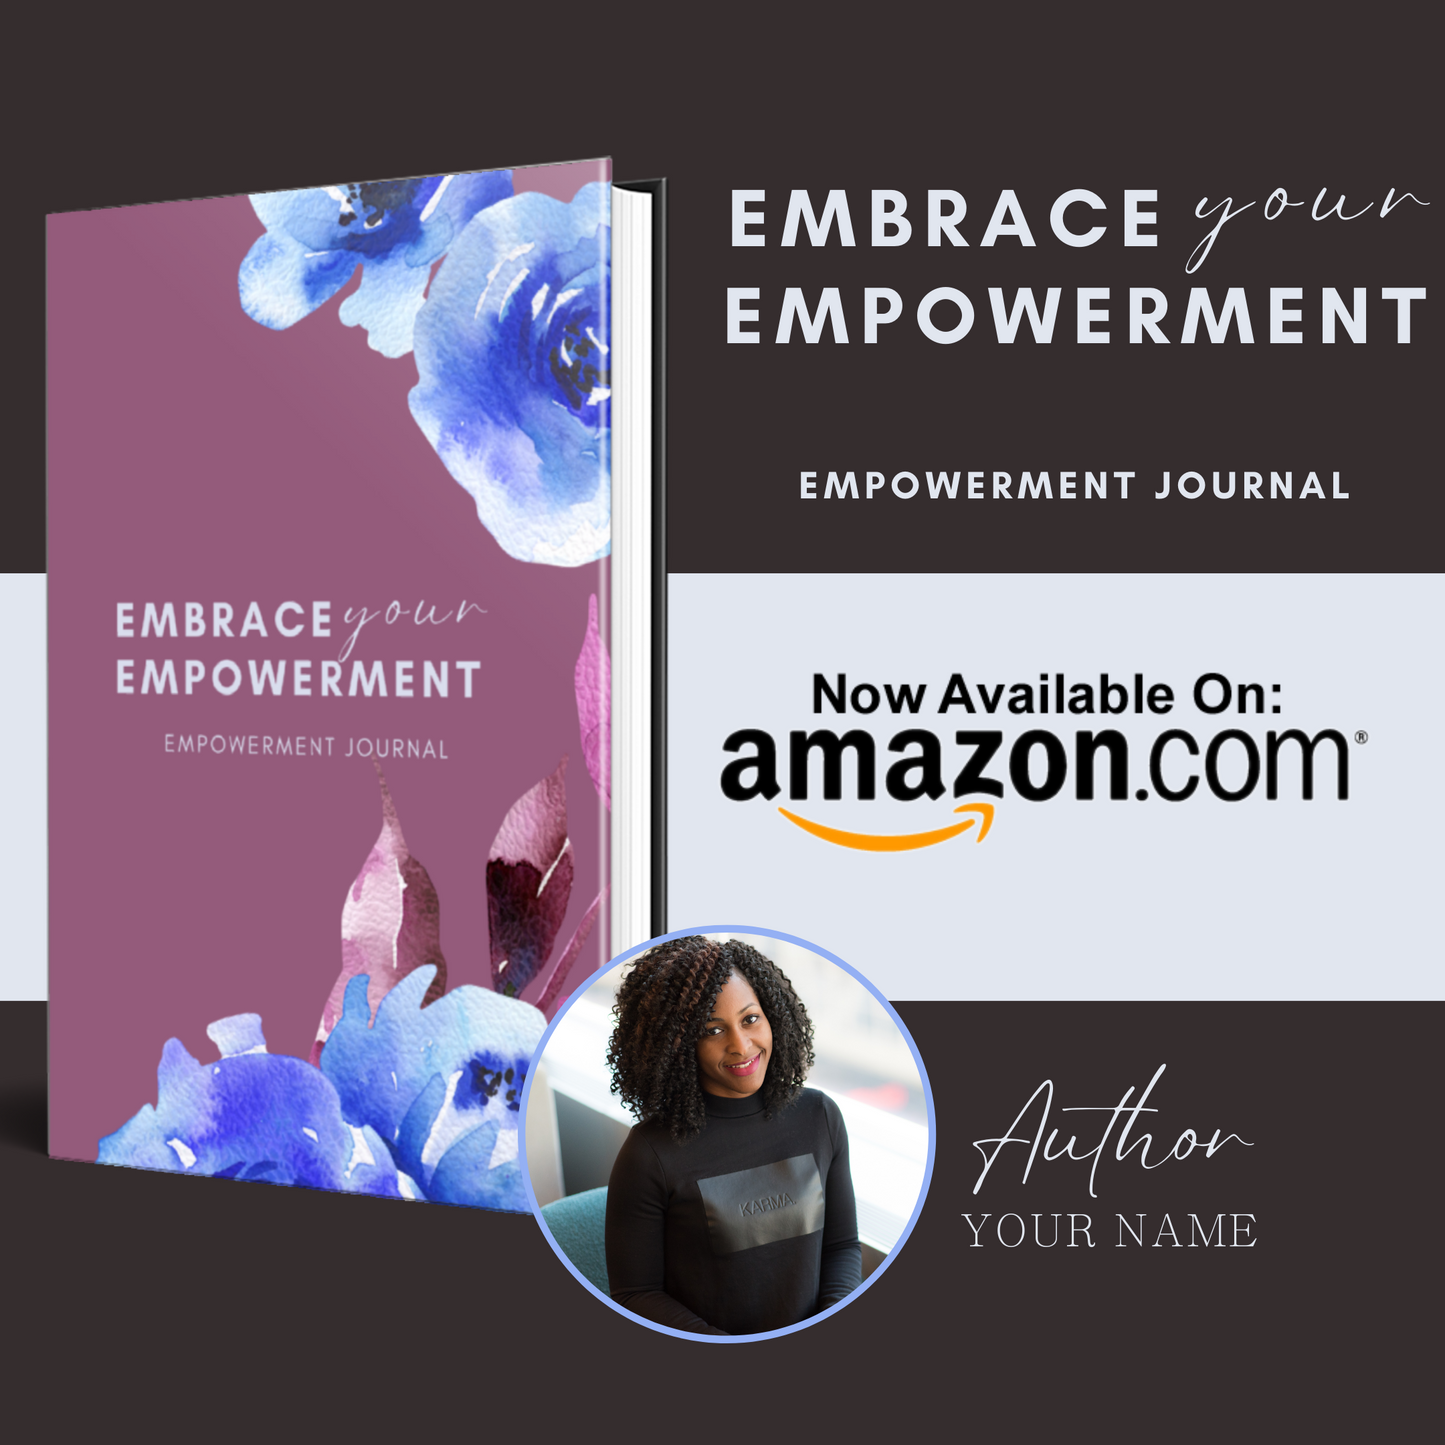 Embrace Your Empowerment Journal for KDP (Amazon)